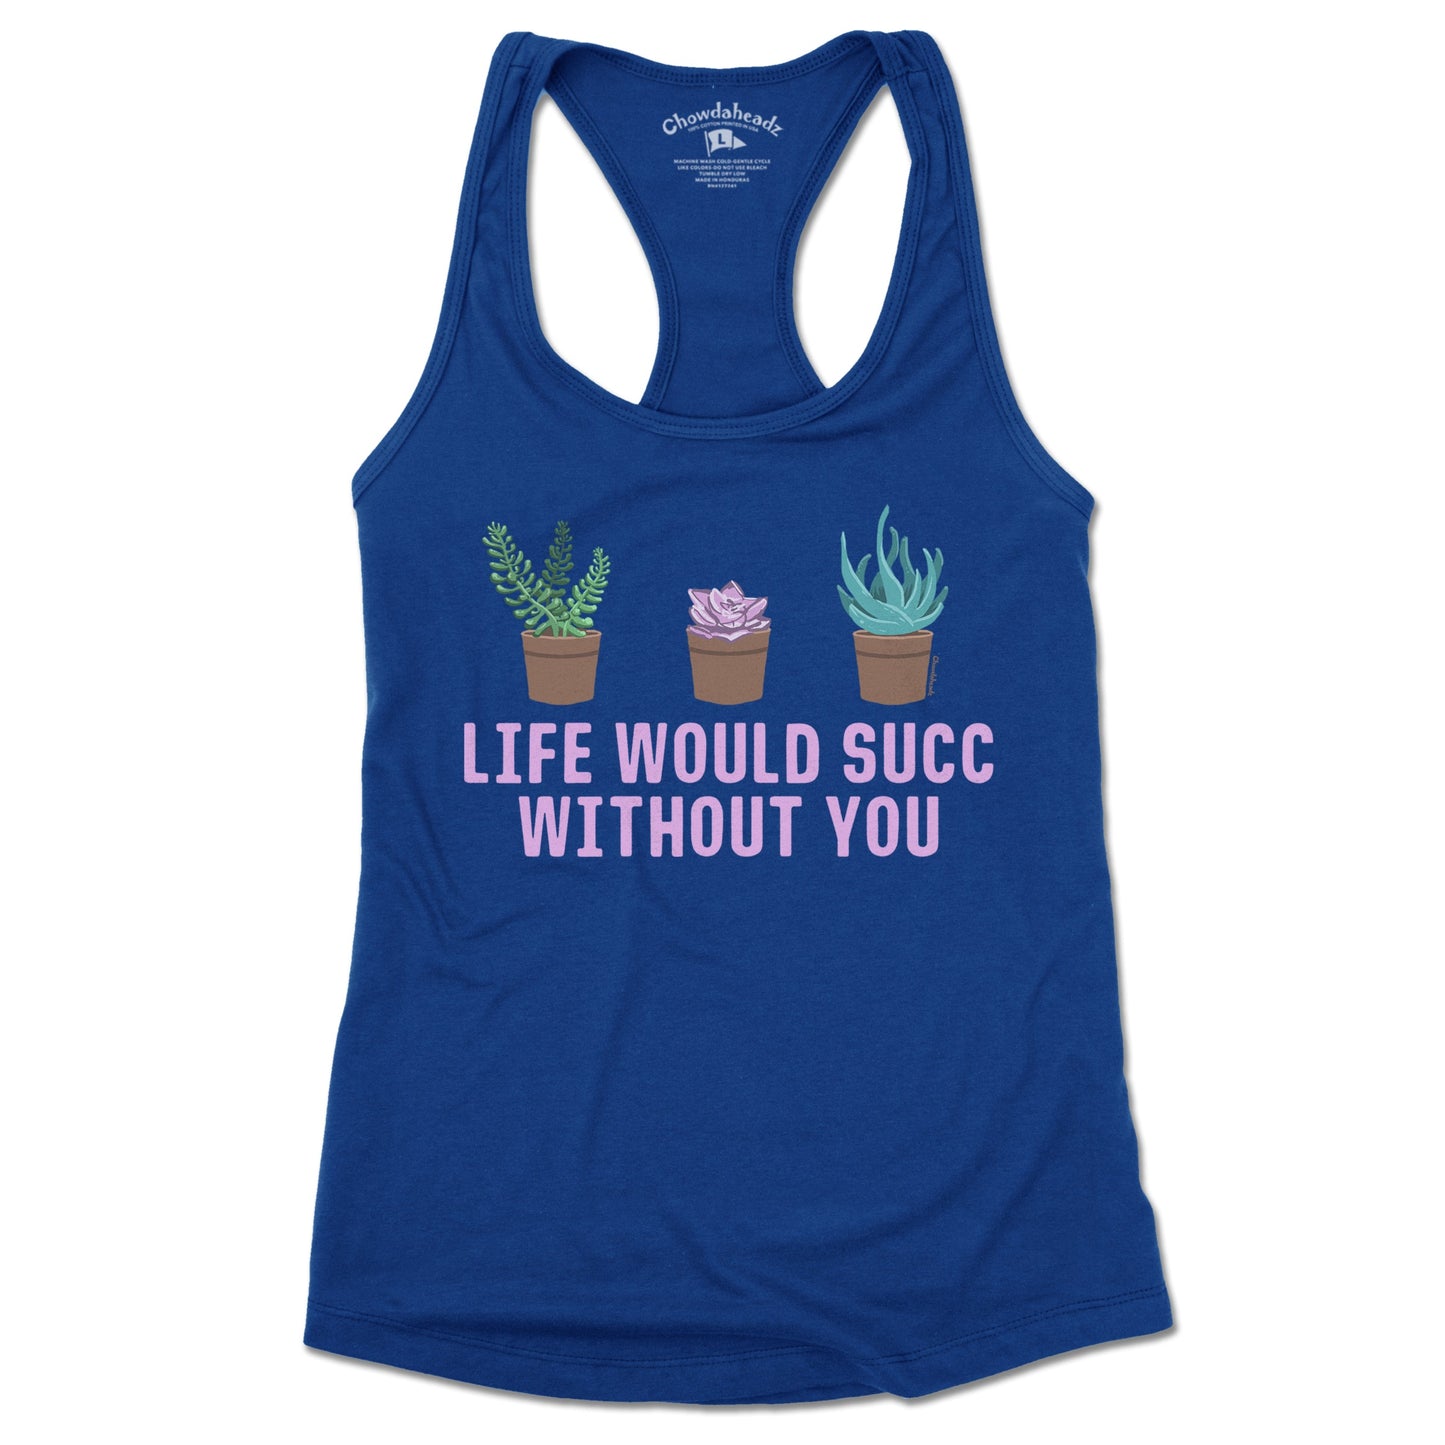 Life Would Succ Without You Ladies Tank Top - Chowdaheadz